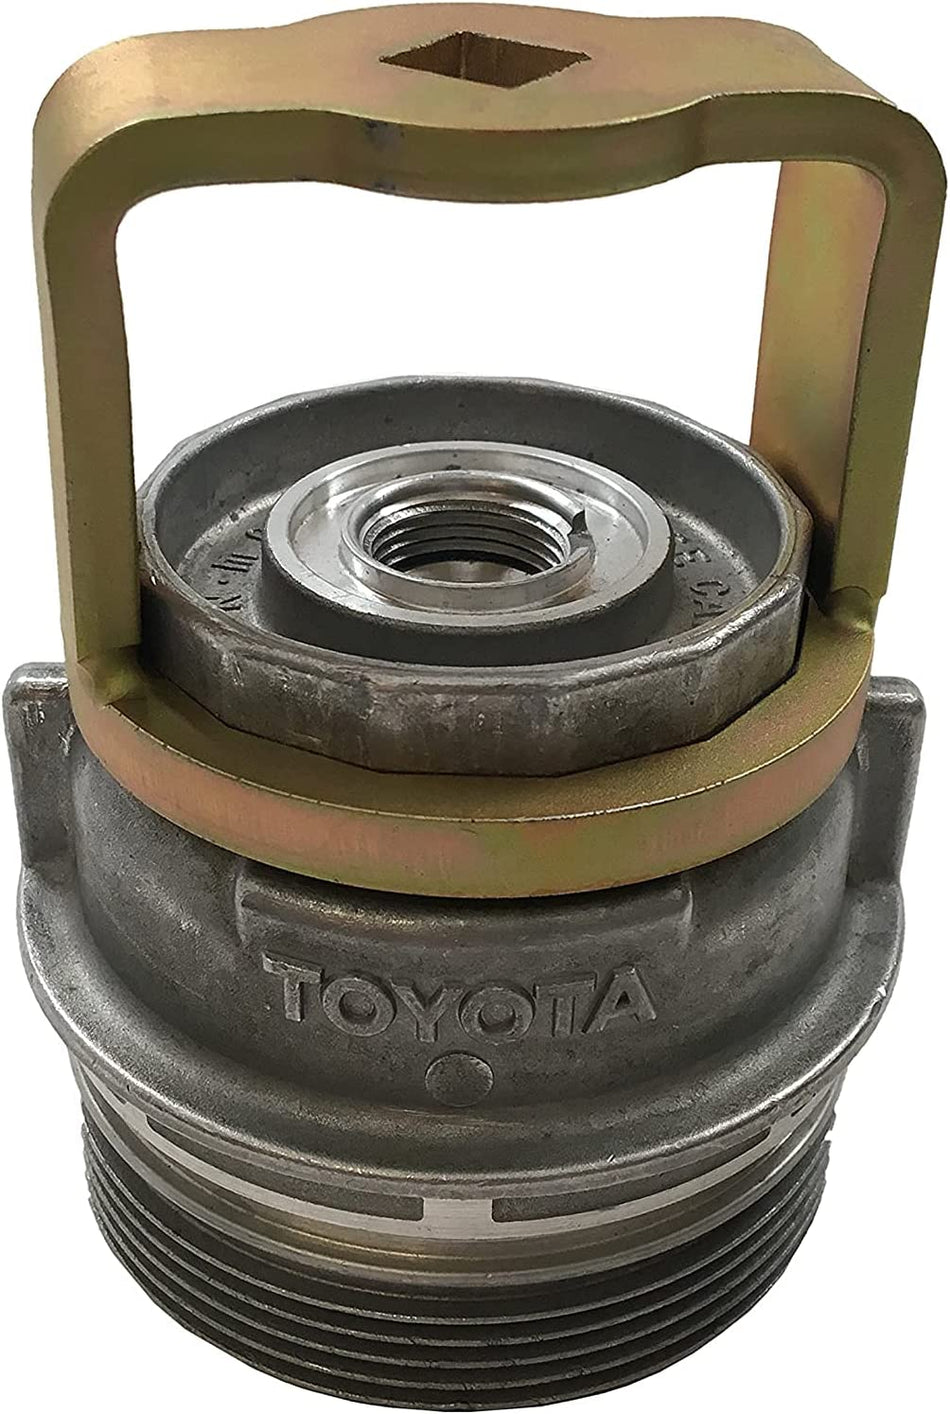 CTA 1726 - Toyota Oil Filter Wrench - 4, 6 & 8 Cyl.